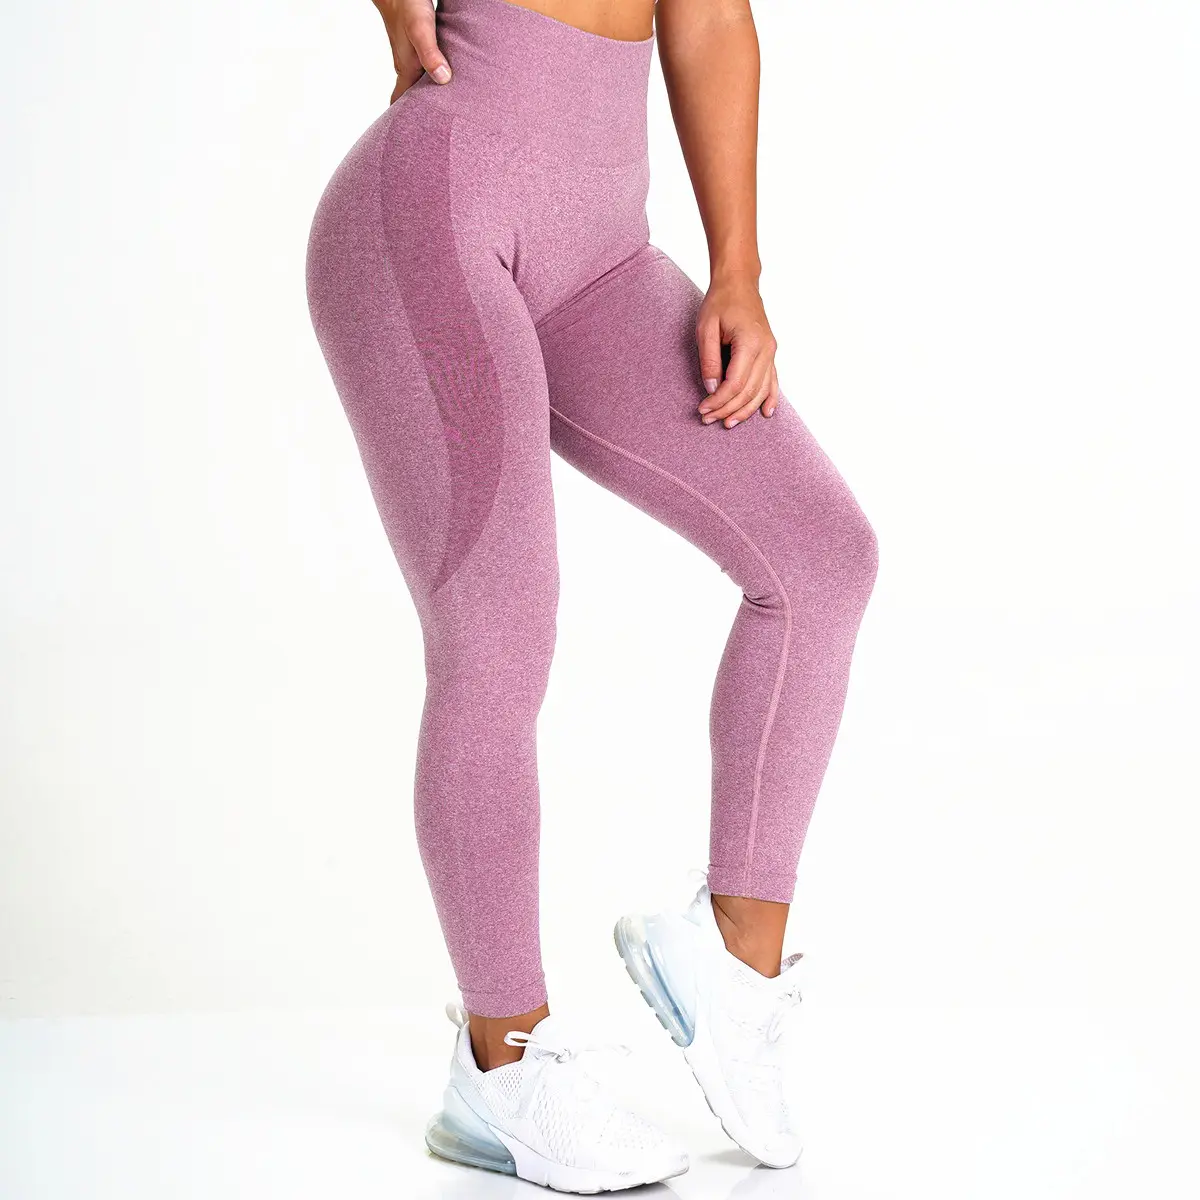 Gym seamless leggings sports women fitness push up yoga pants solid color high waist squat exercise running sportswear tights